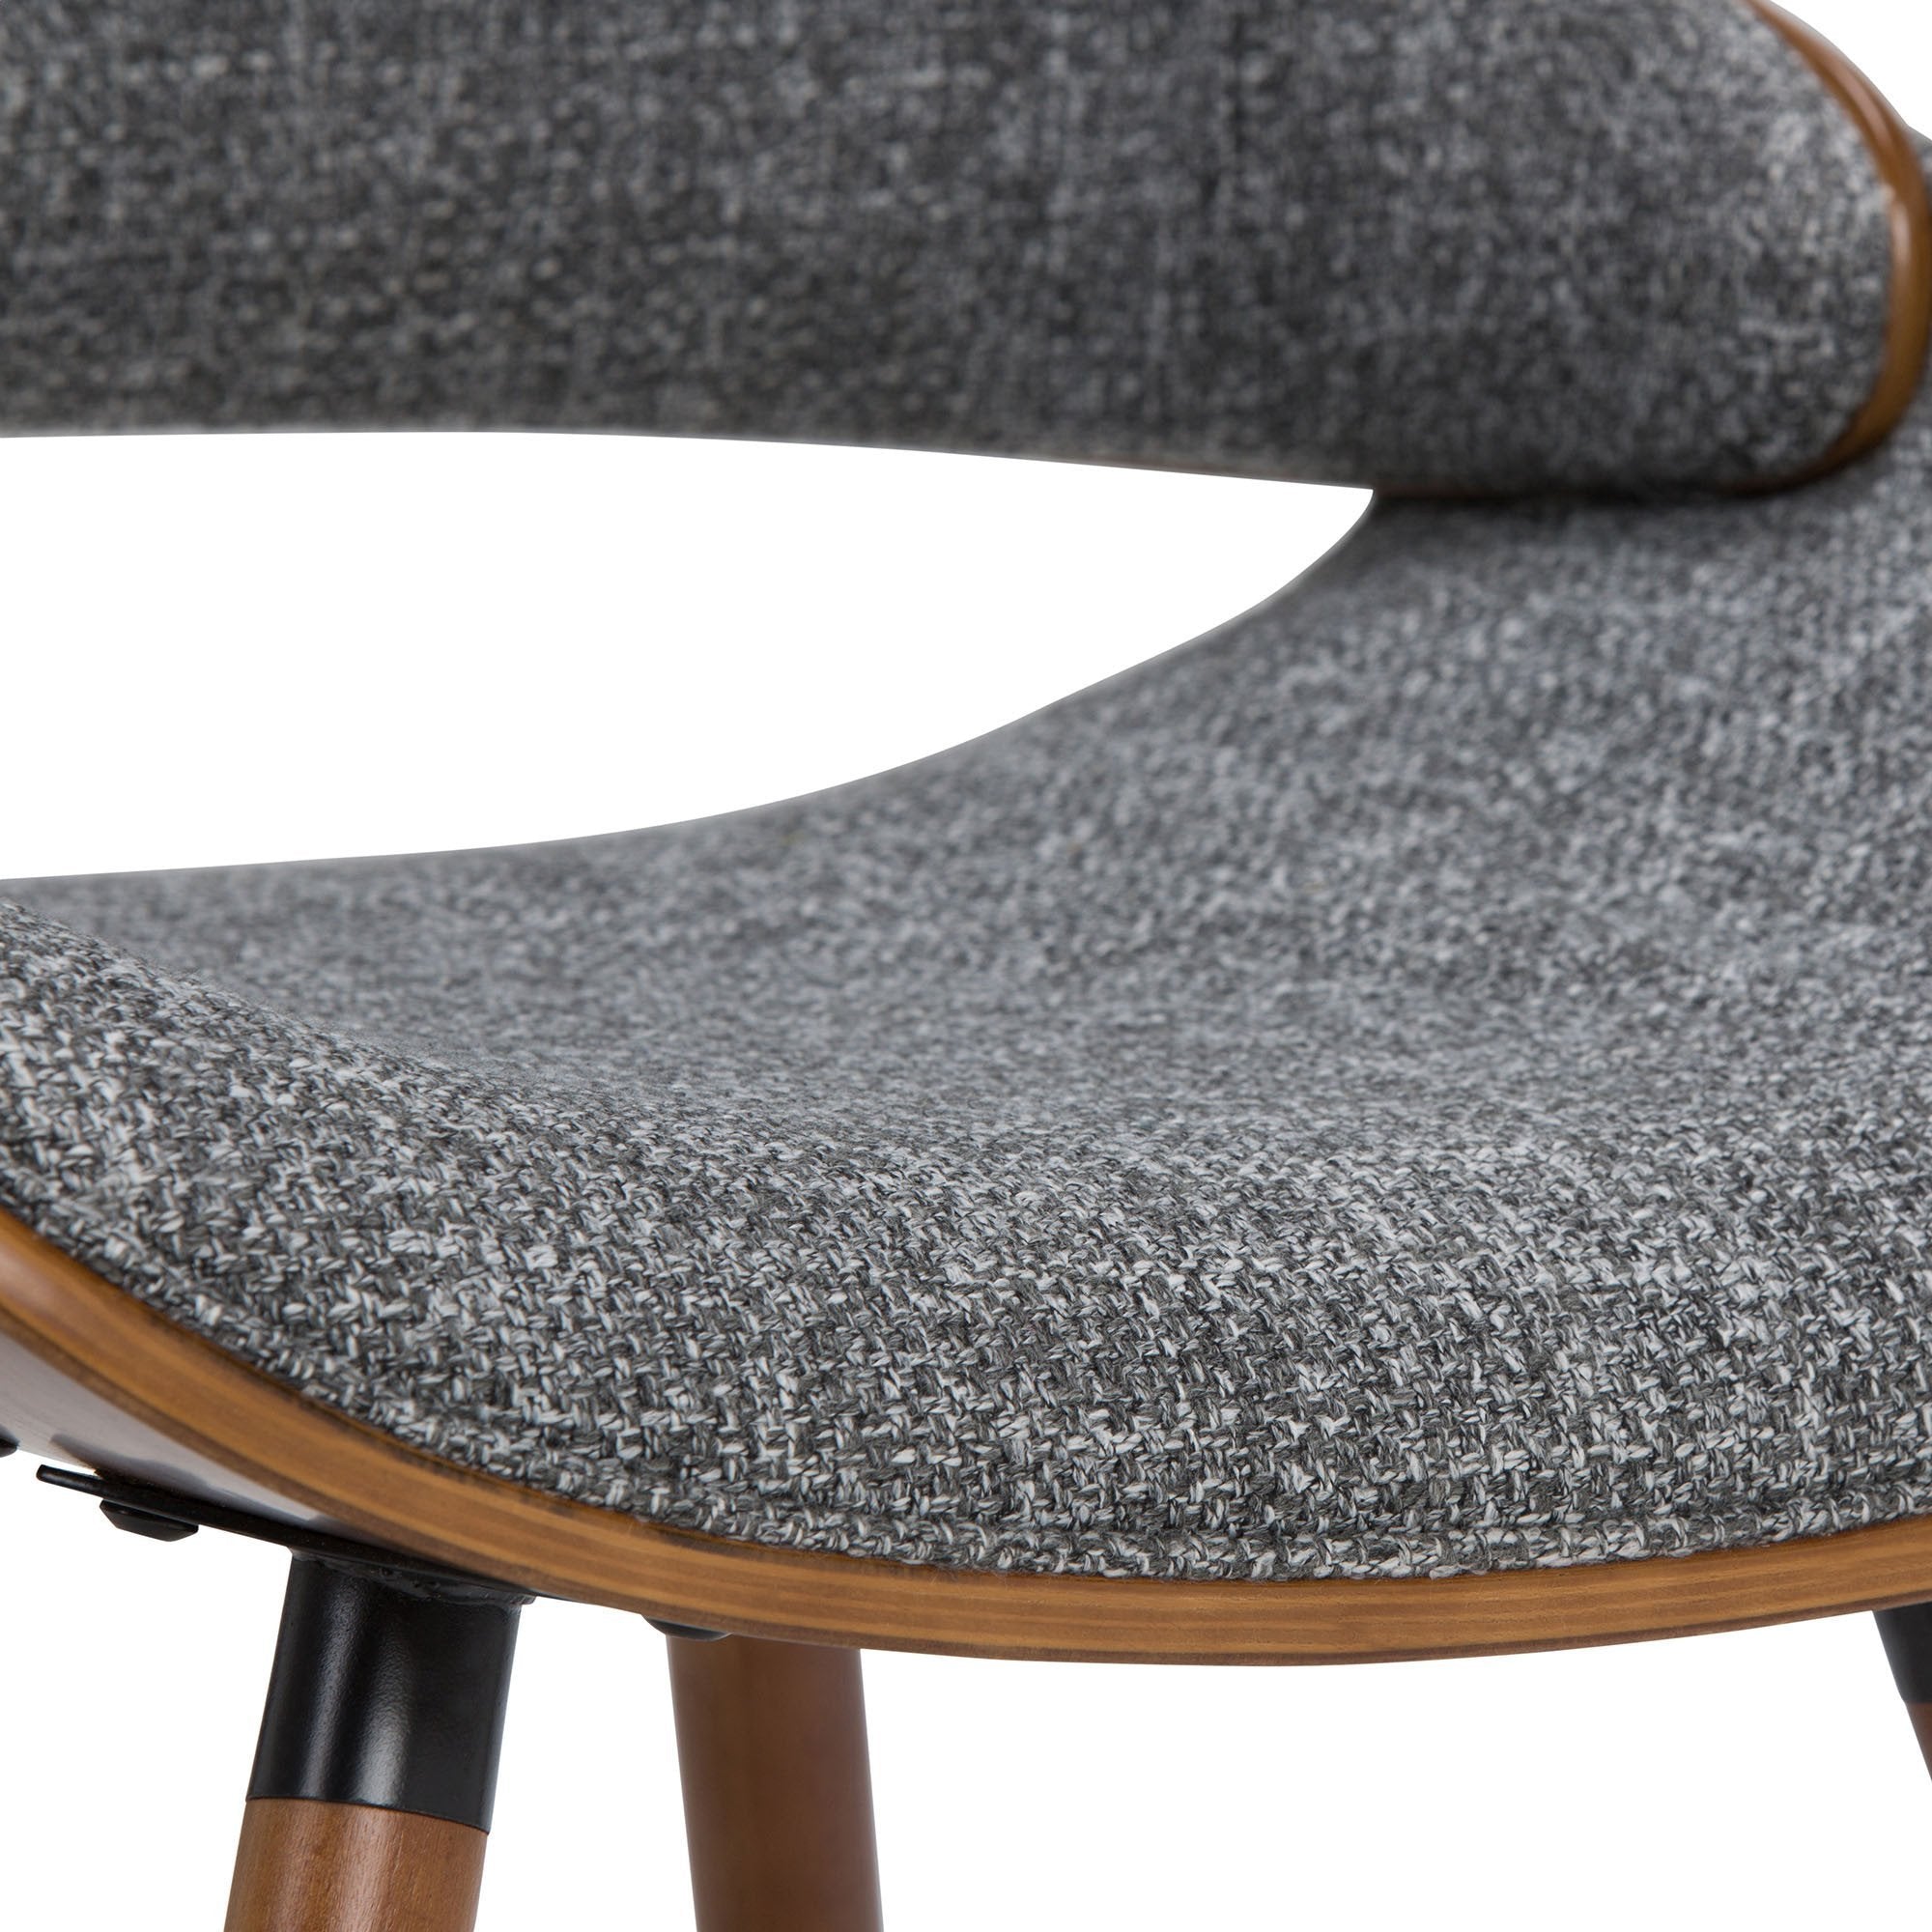 Grey Walnut Woven Fabric| Malden Bentwood Dining Chair in Grey Woven Fabric